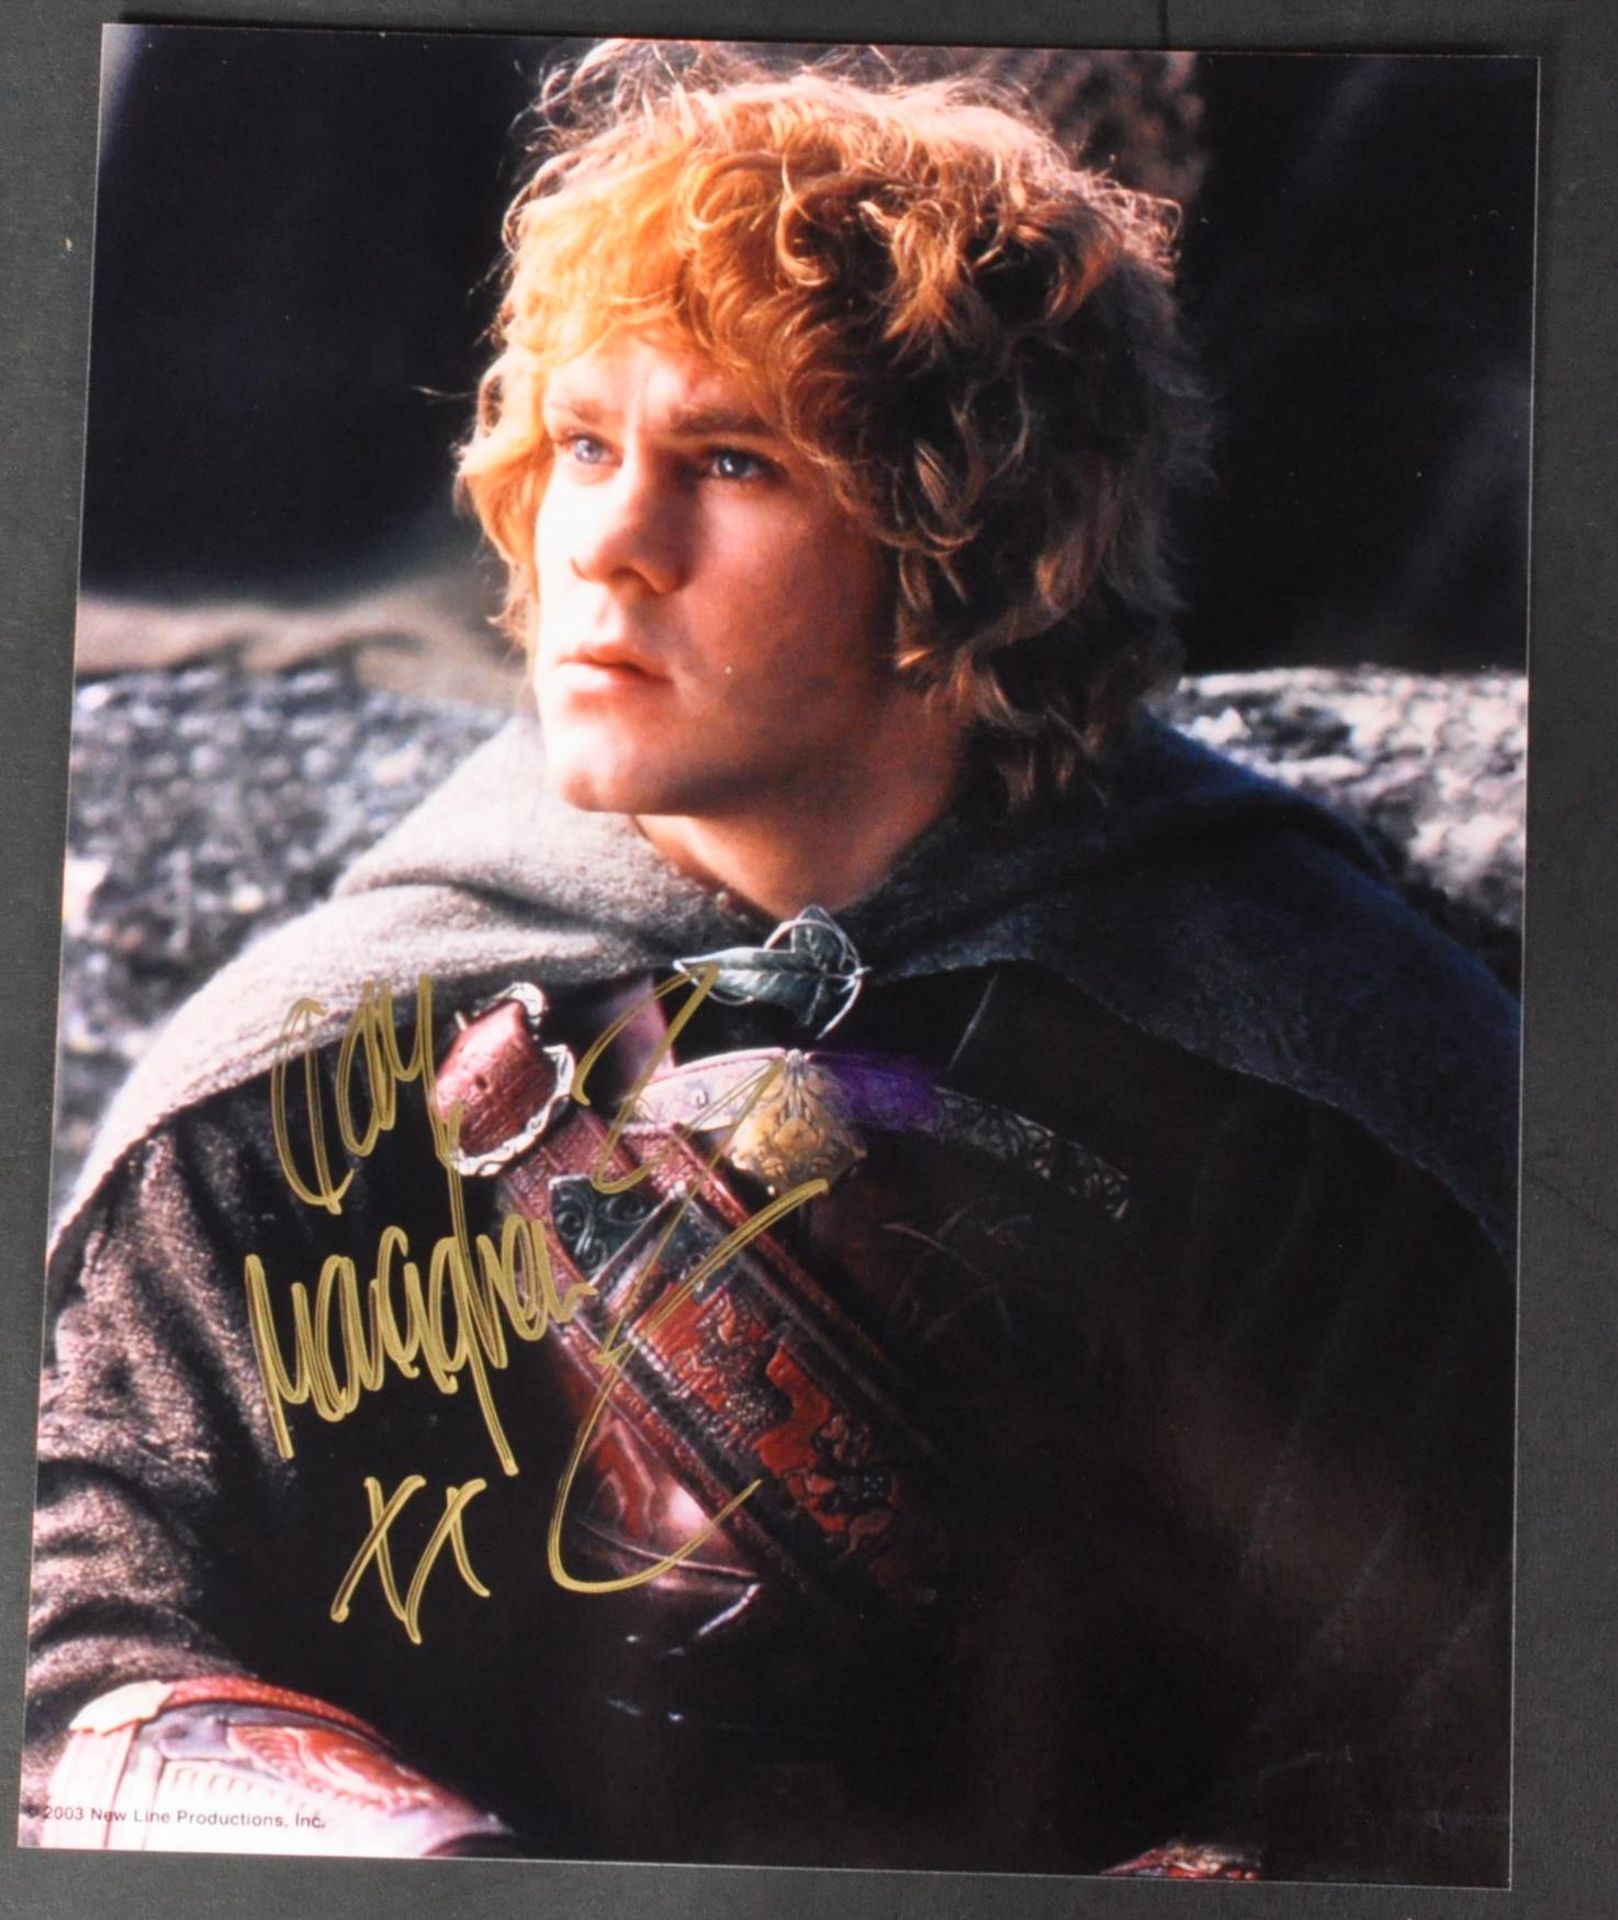 THE LORD OF THE RINGS - DOMINIC MONAGHAN - SIGNED 8X10" PHOTO